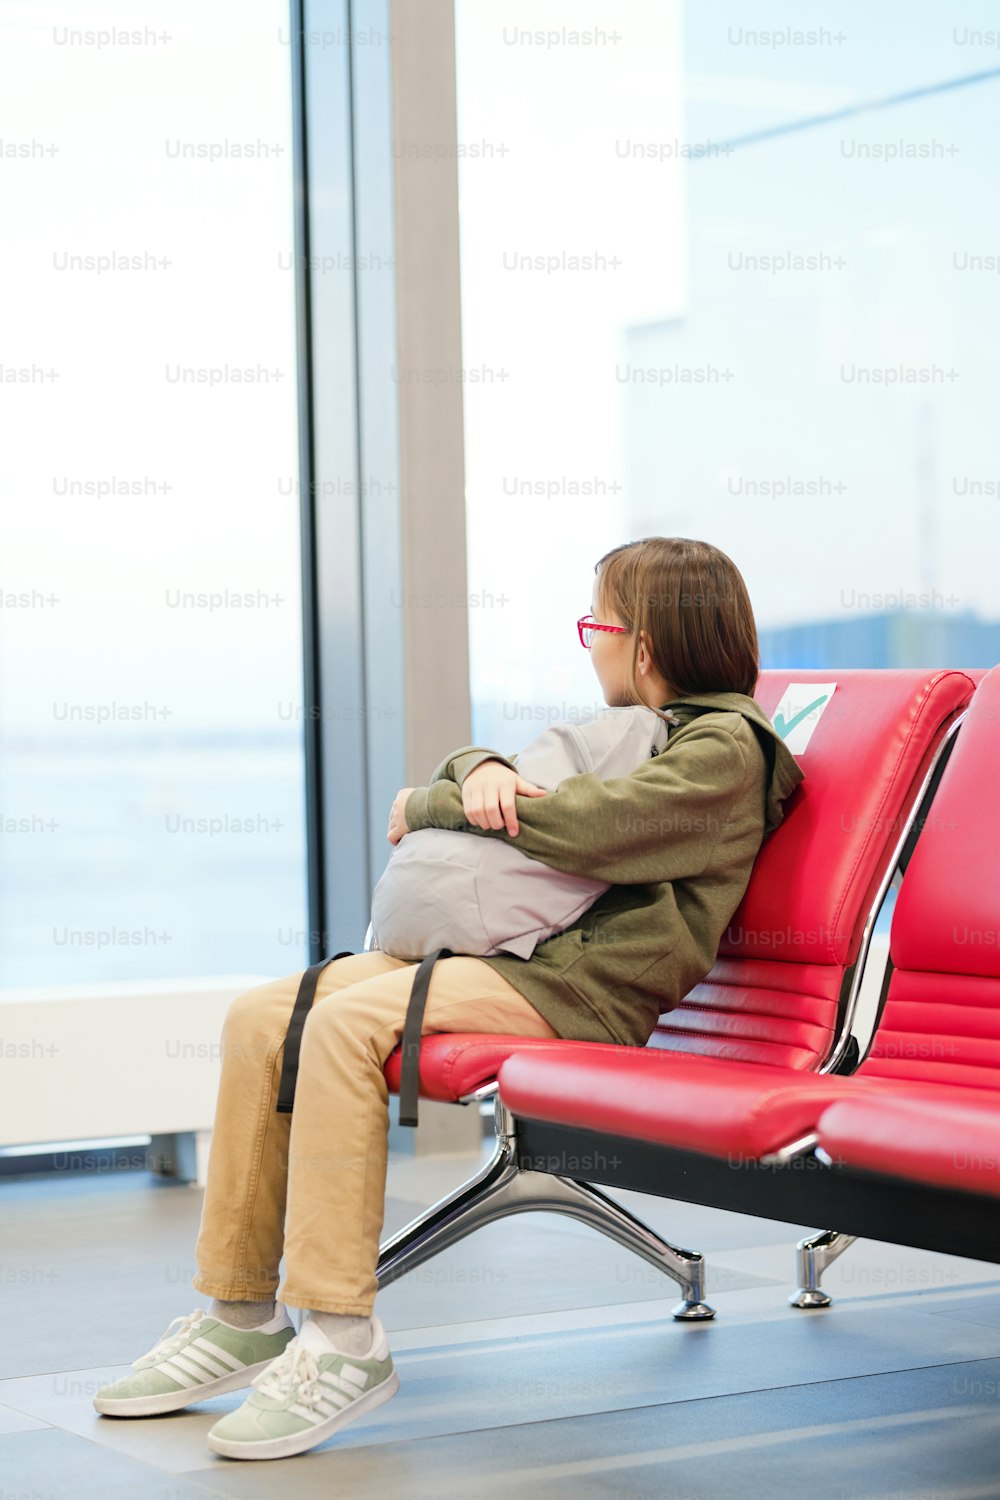 Little girl with backpack sitting on chair and looking at window waiting for her departure in airport terminal